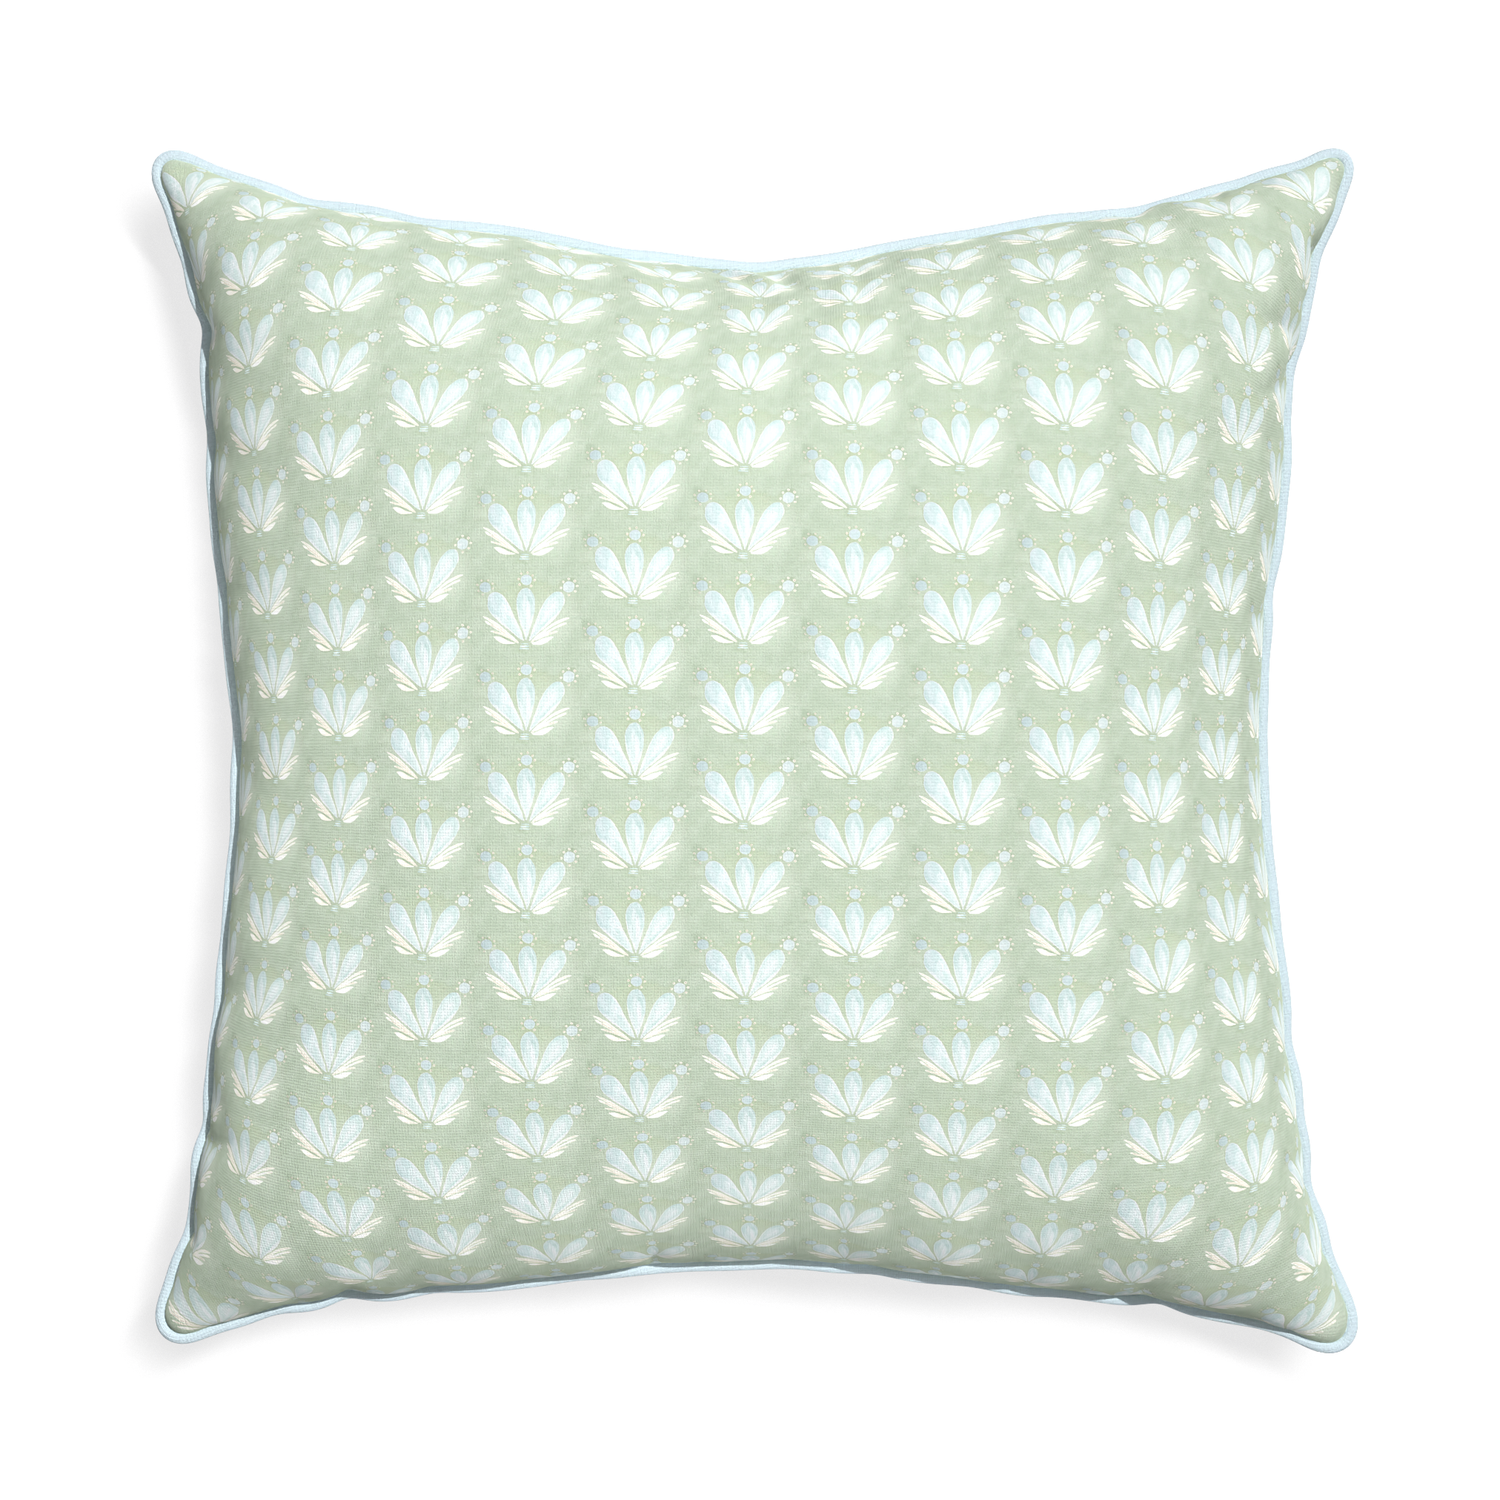 Euro-sham serena sea salt custom blue & green floral drop repeatpillow with powder piping on white background